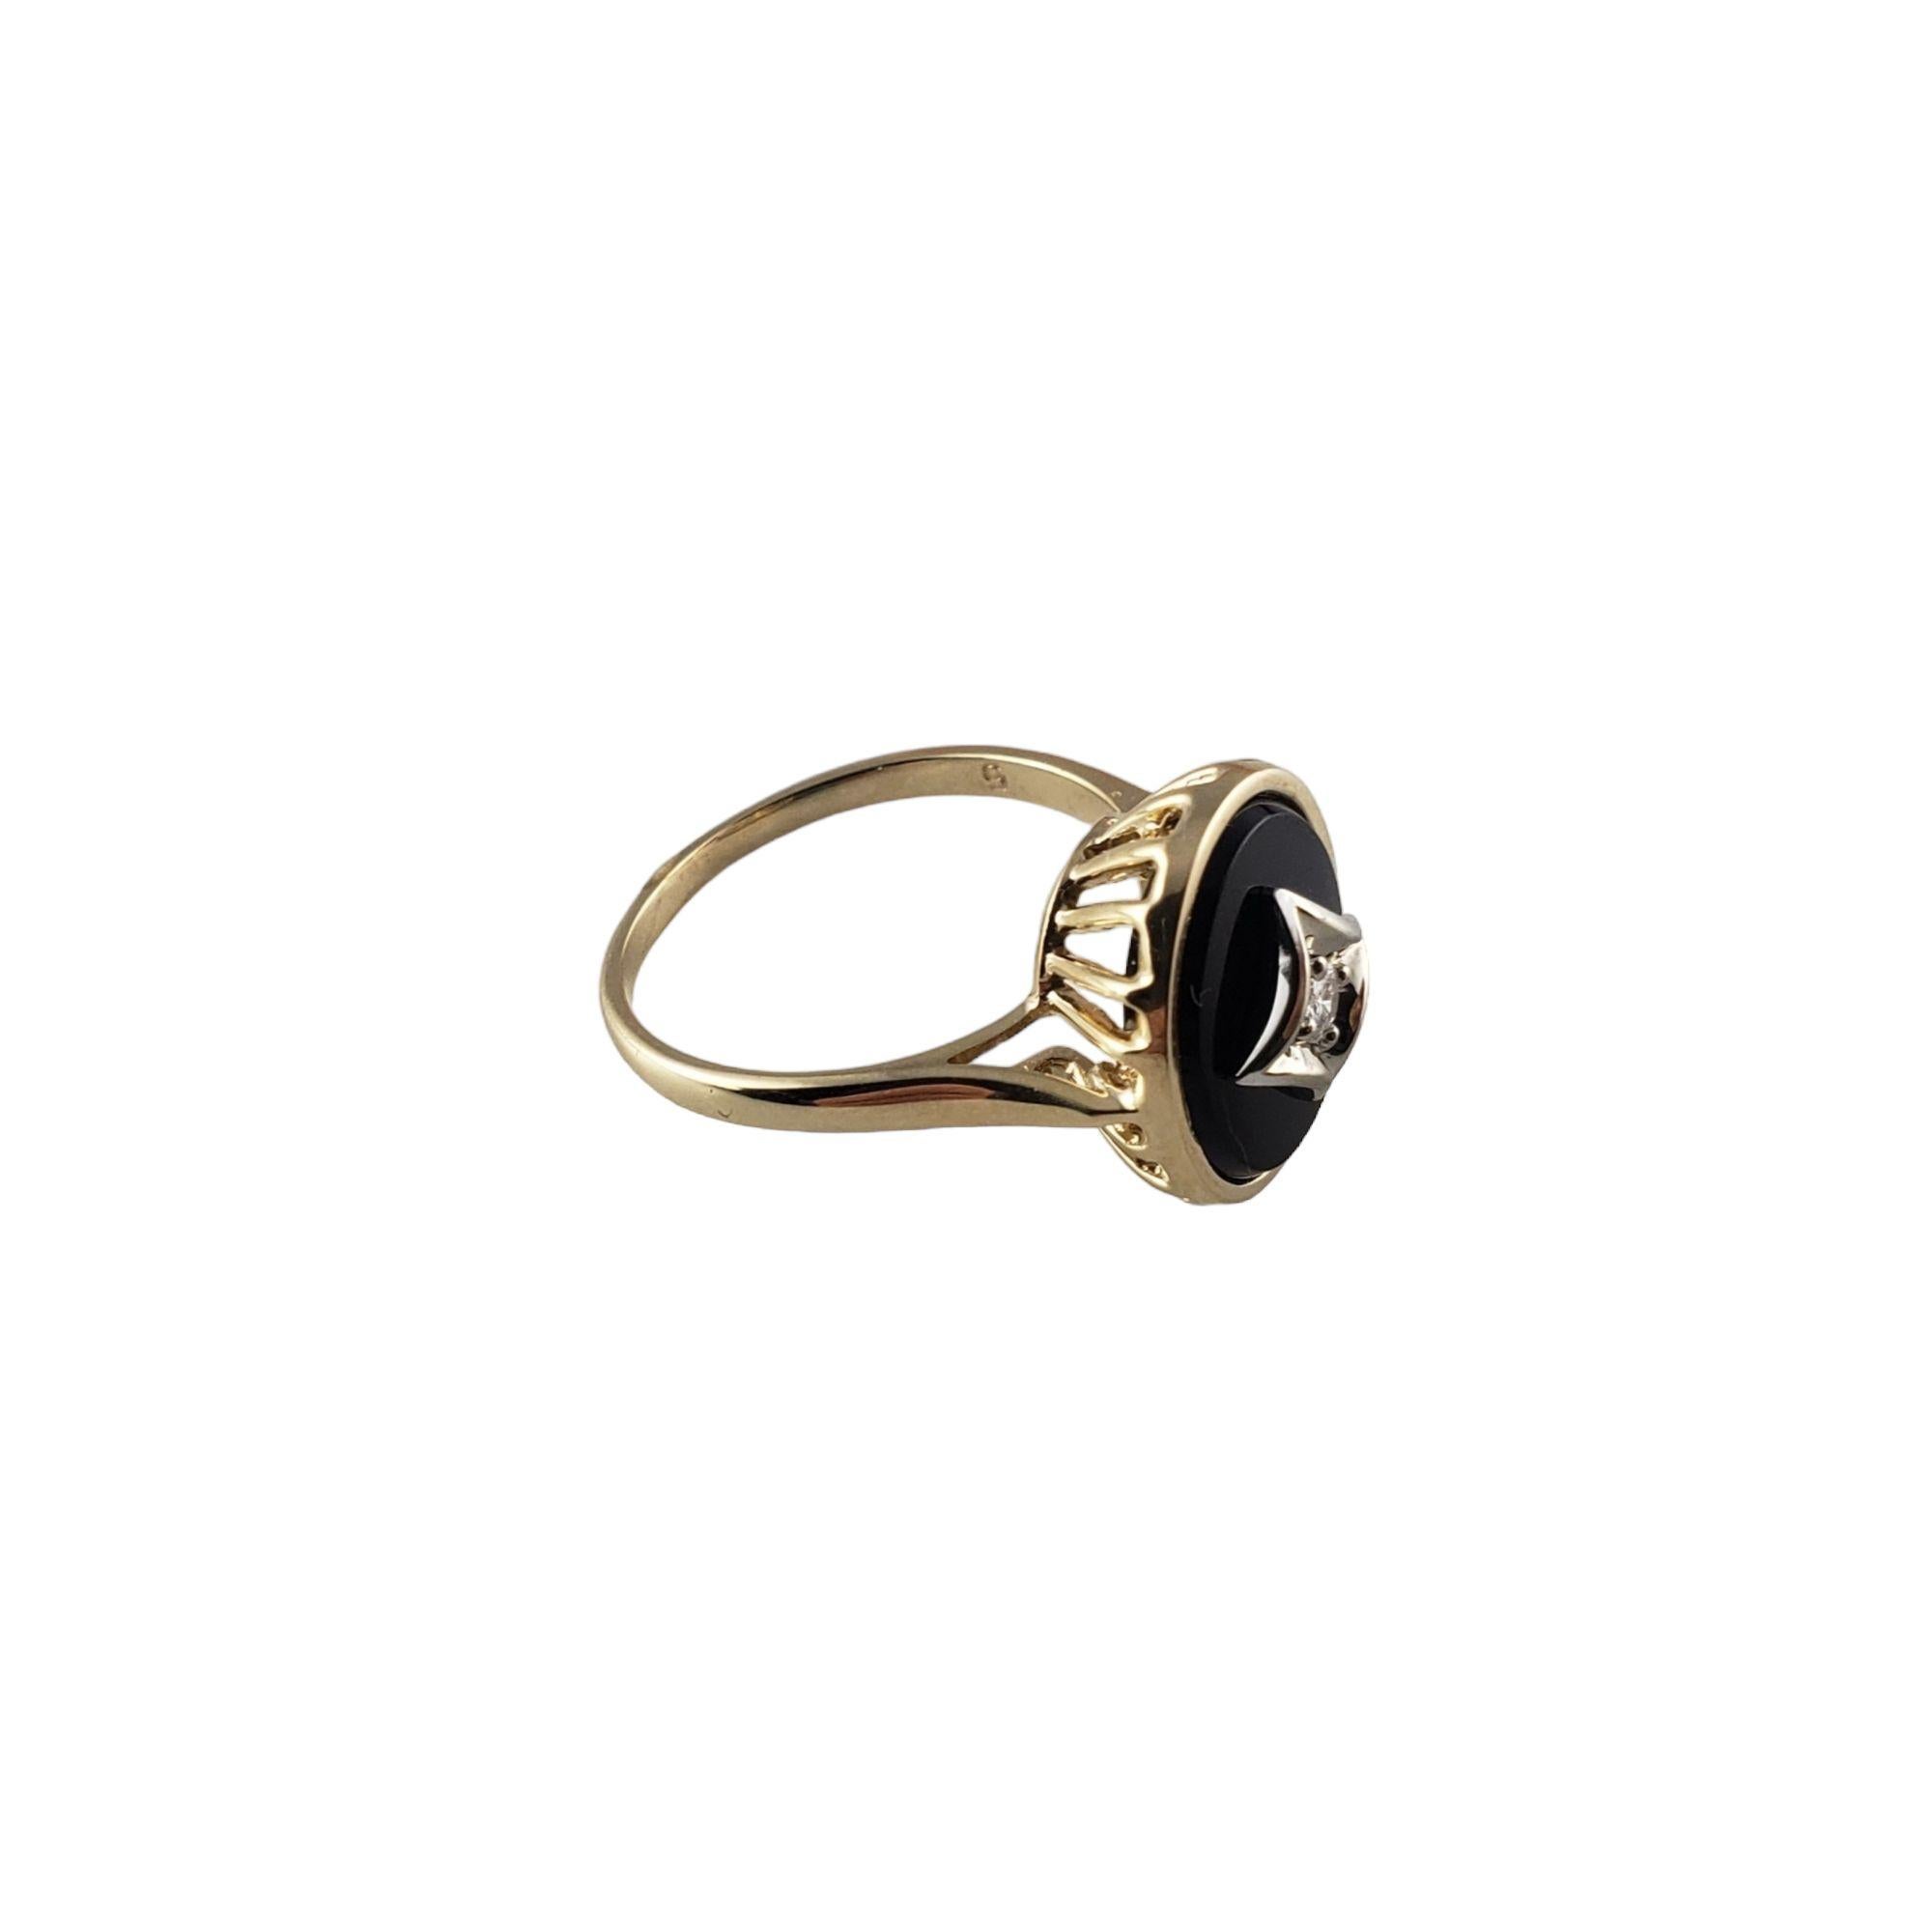 Vintage 14 Karat Yellow Gold Onyx and Diamond Ring Size 6.25-

This lovely black onyx ring features one round brilliant cut diamond set in beautifully detailed 14K yellow gold.
Top of ring measures 14 mm x 12 mm. Shank: 1 mm.

Approximate total